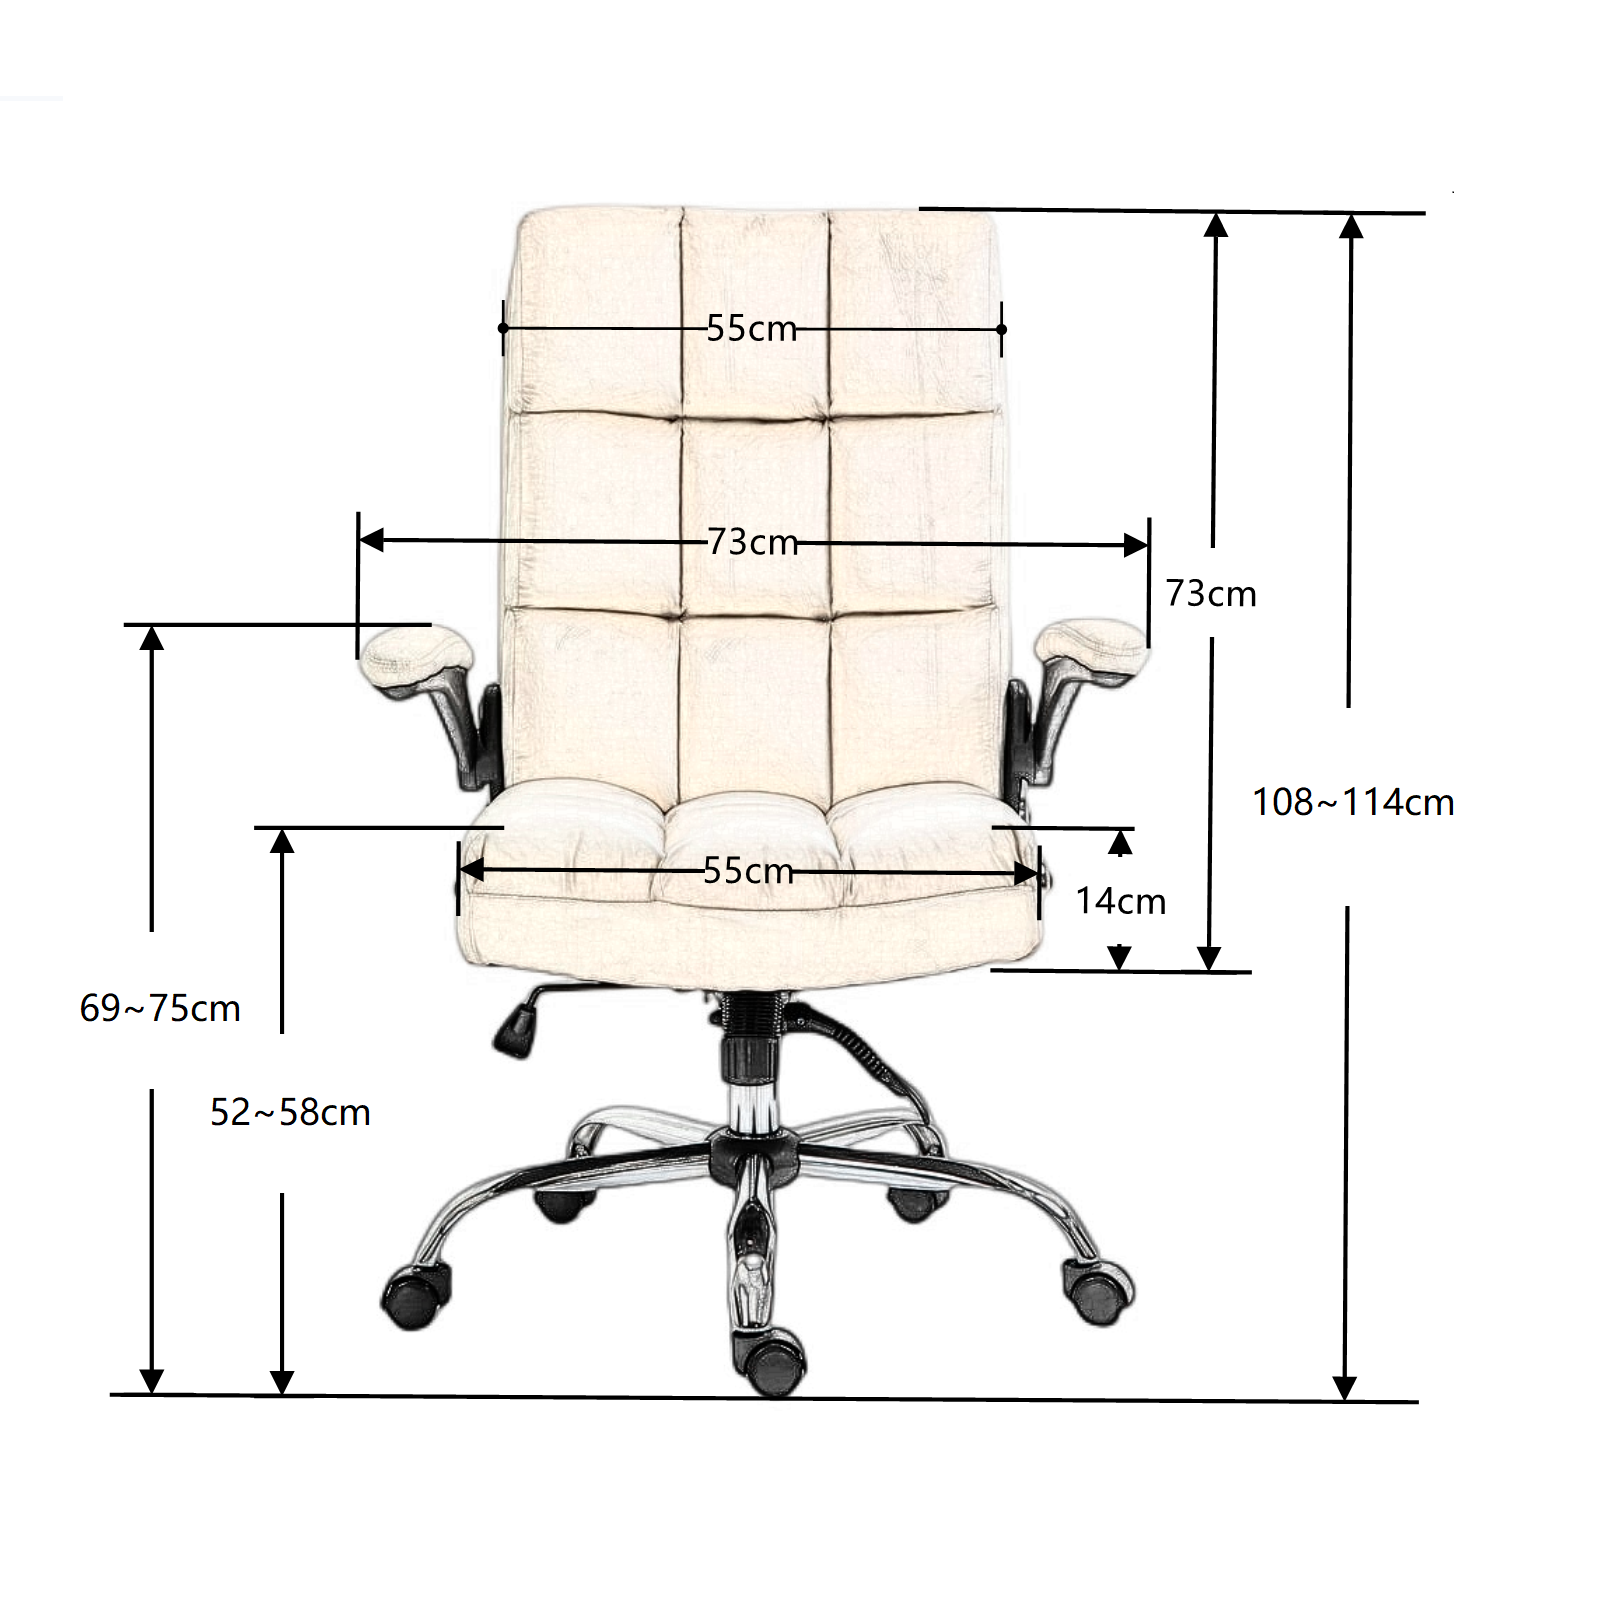 Fabric Home Ergonomic Swivel Adjustable Tilt Angle and Flip-up Arms Office Chair -Gray Odin Furniture